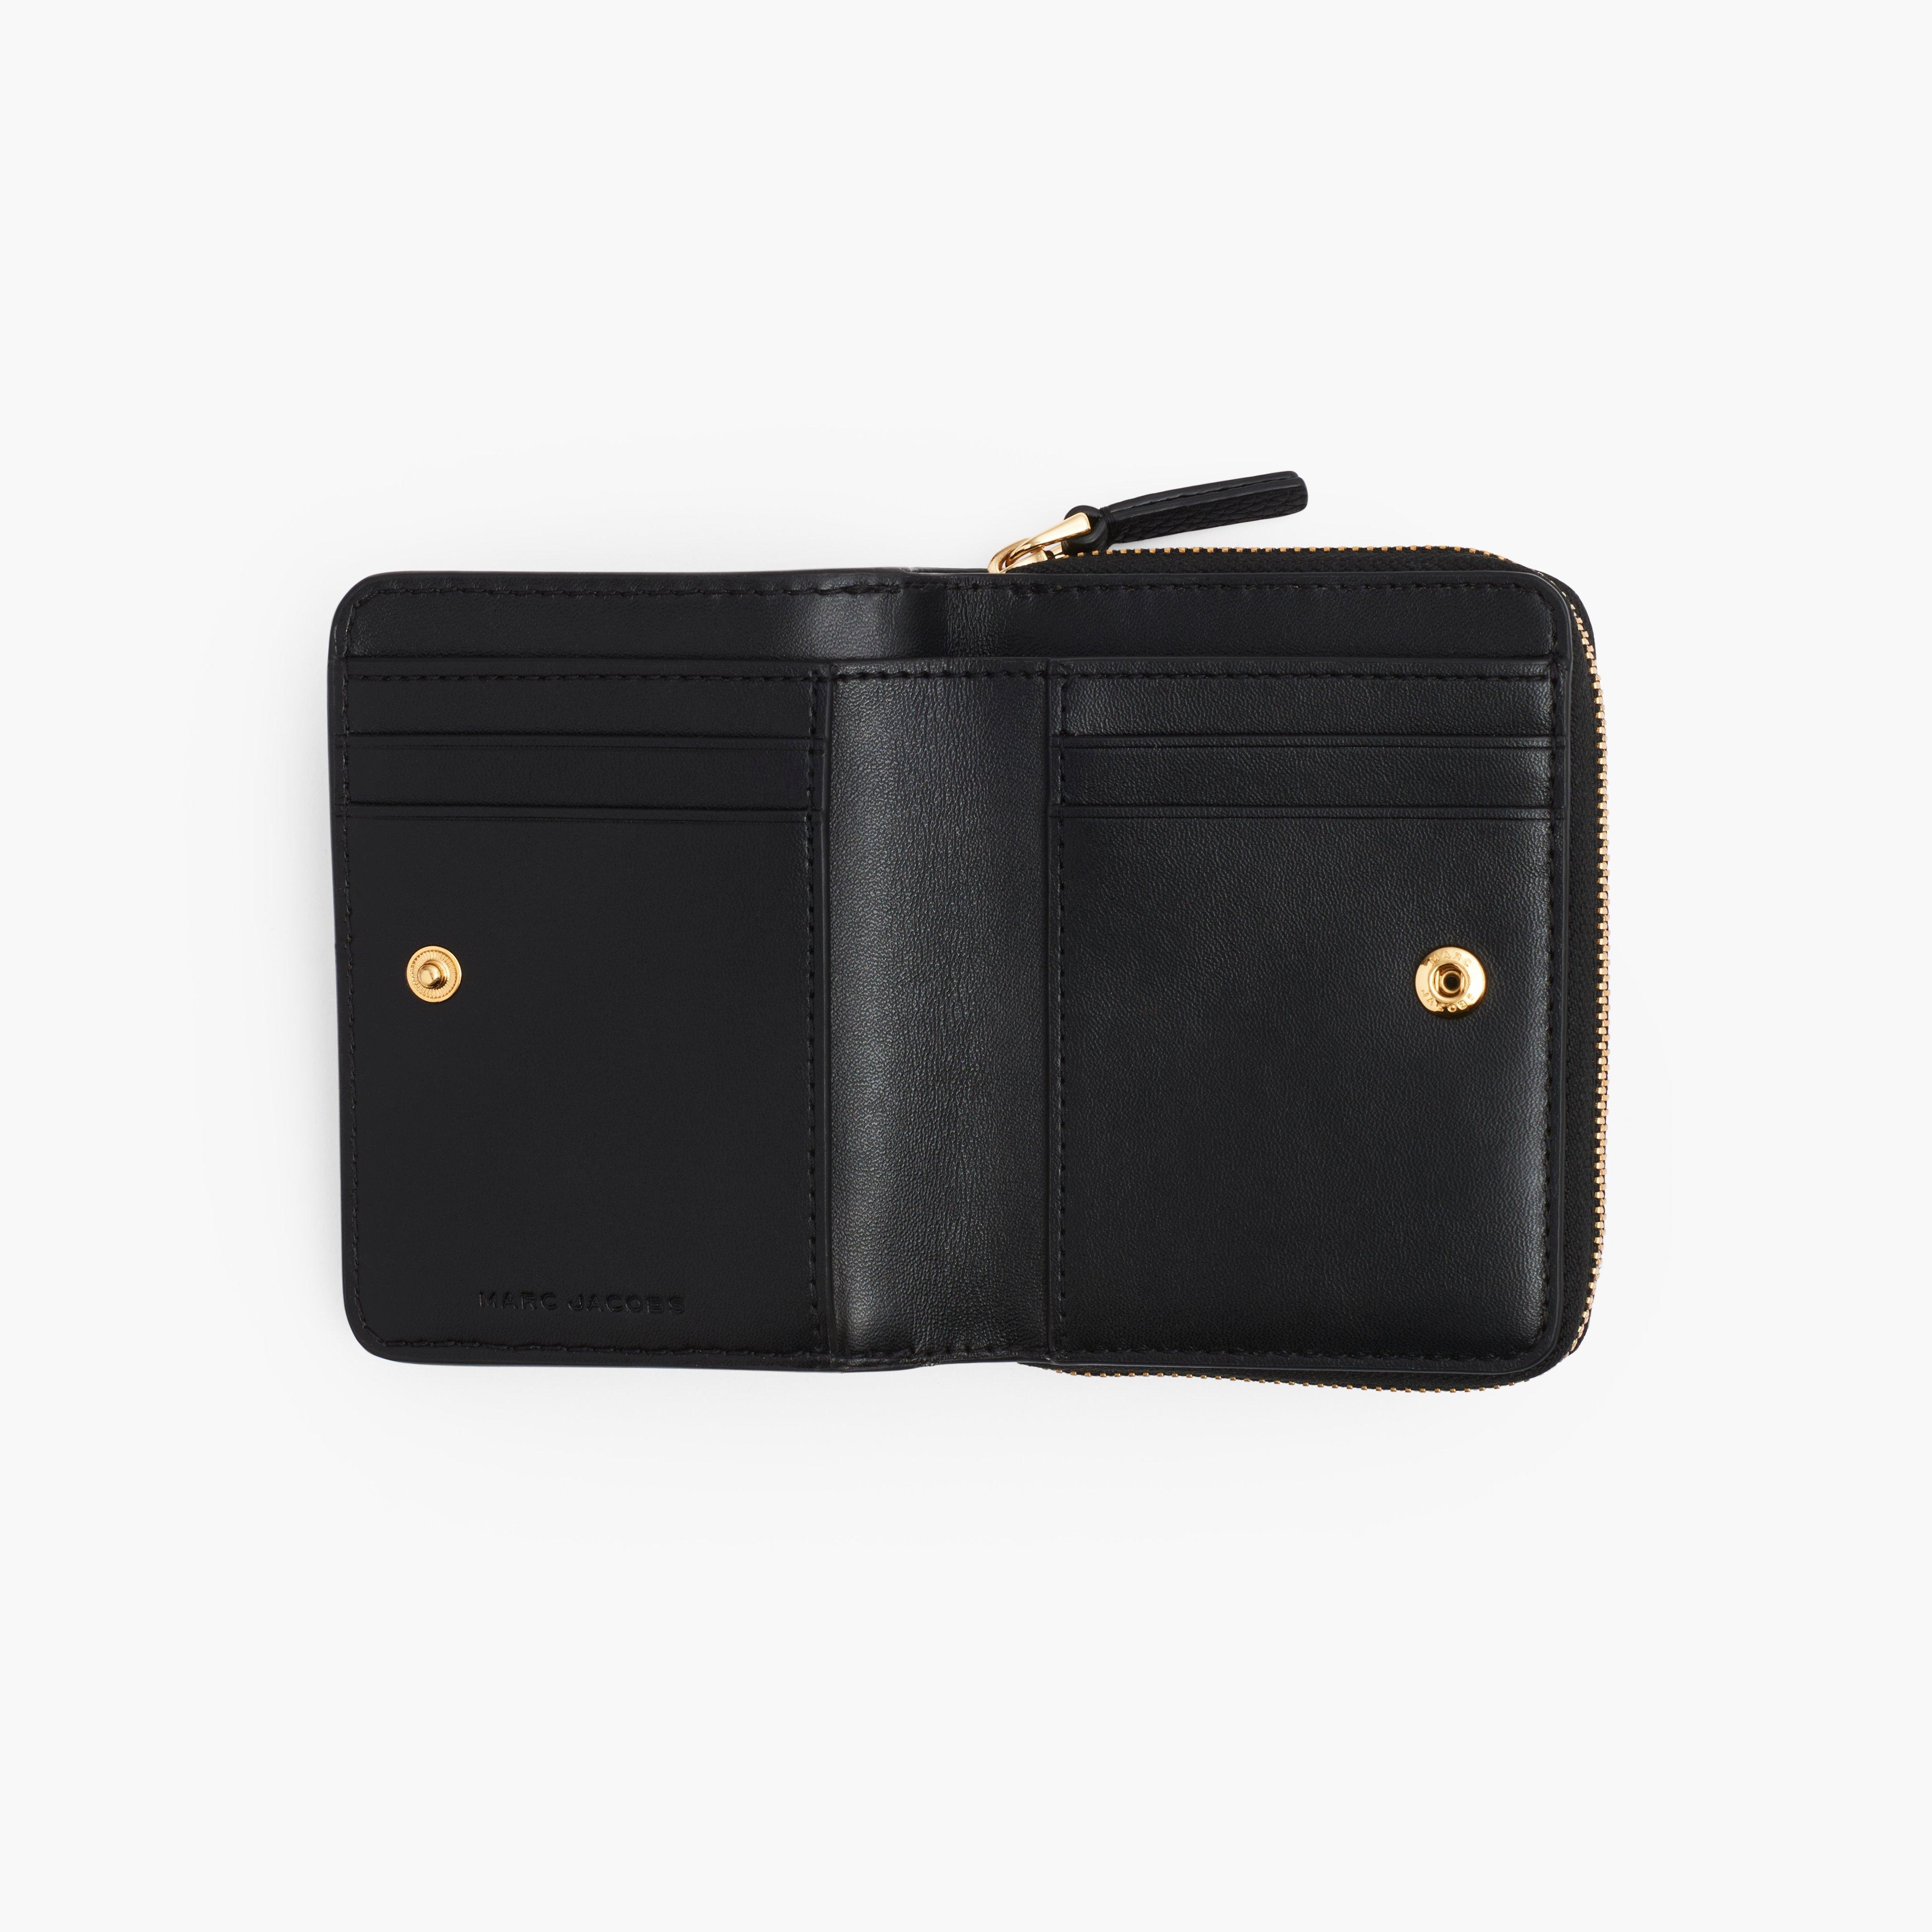 THE LEATHER MINI COMPACT WALLET - 2